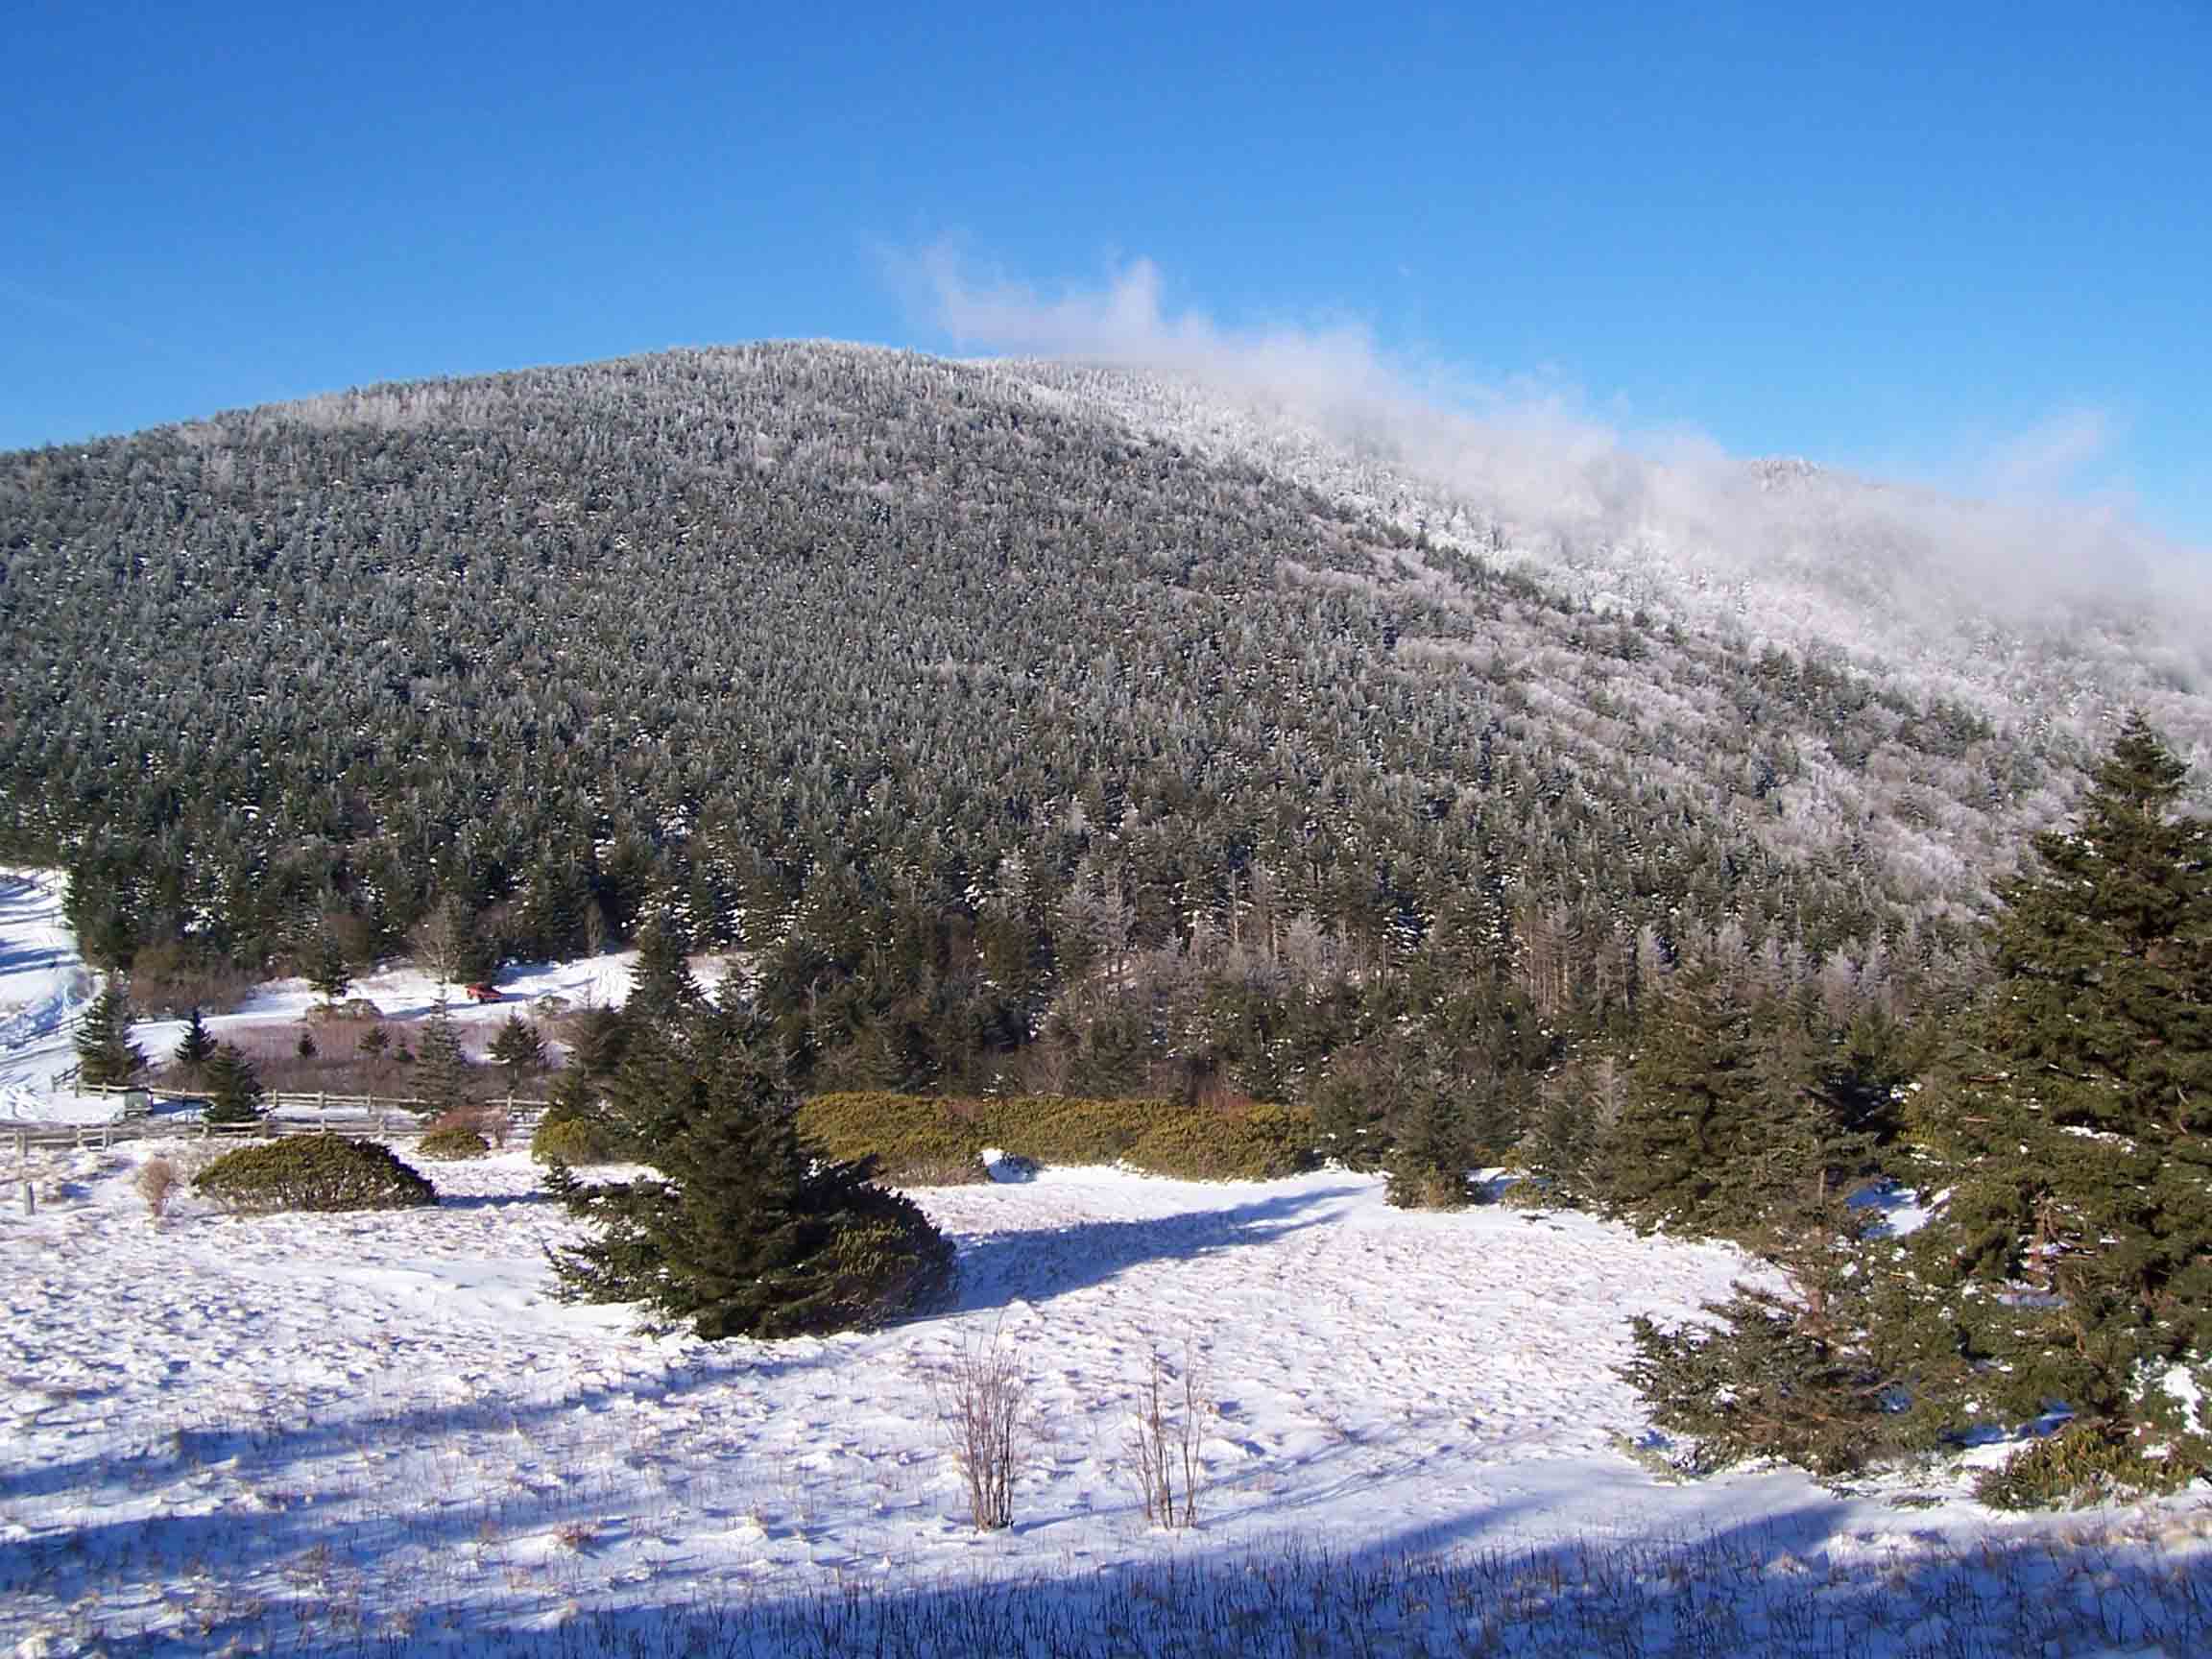 Roan Mountain, Mar 2005, taken from Round Bald (approx. MM 14.0). You can see my jeep parked at Carver's Gap.  Courtesy willey54@yahoo.com